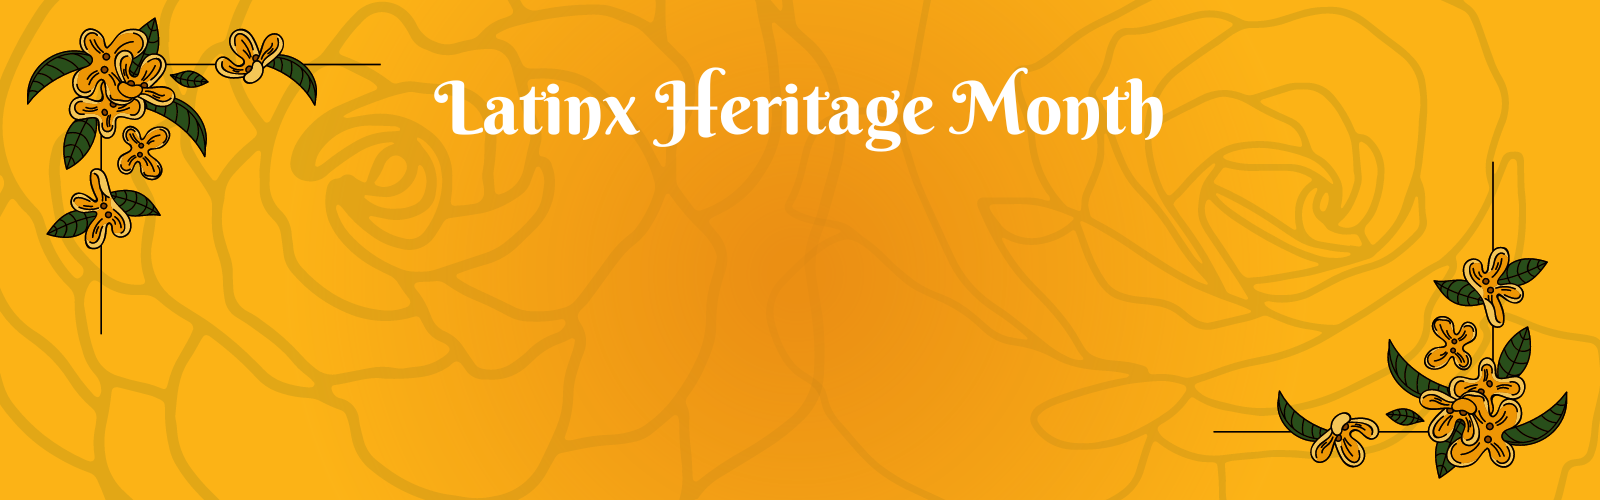 Yellow and orange banner reading Latinx Heritage Month with floral illustrations